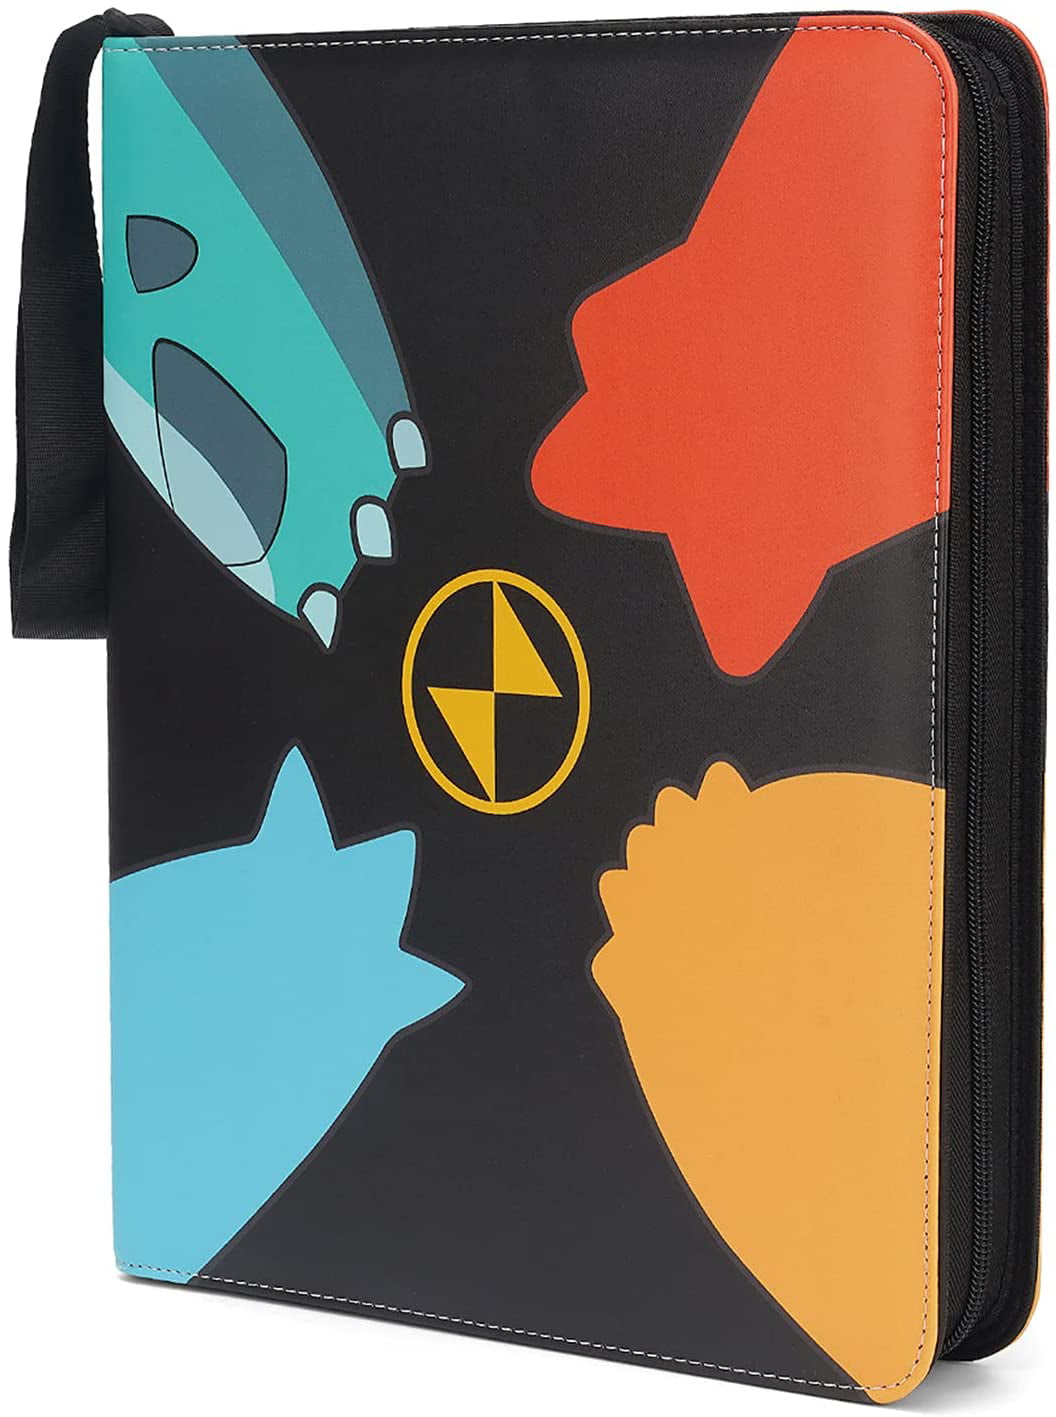 For Pokemon Card Binder Folder 4-Pocket 400 Pockets with 50 Removable Sleeve Included fit 400 Trading Cards for Pokemon Card Holder Book